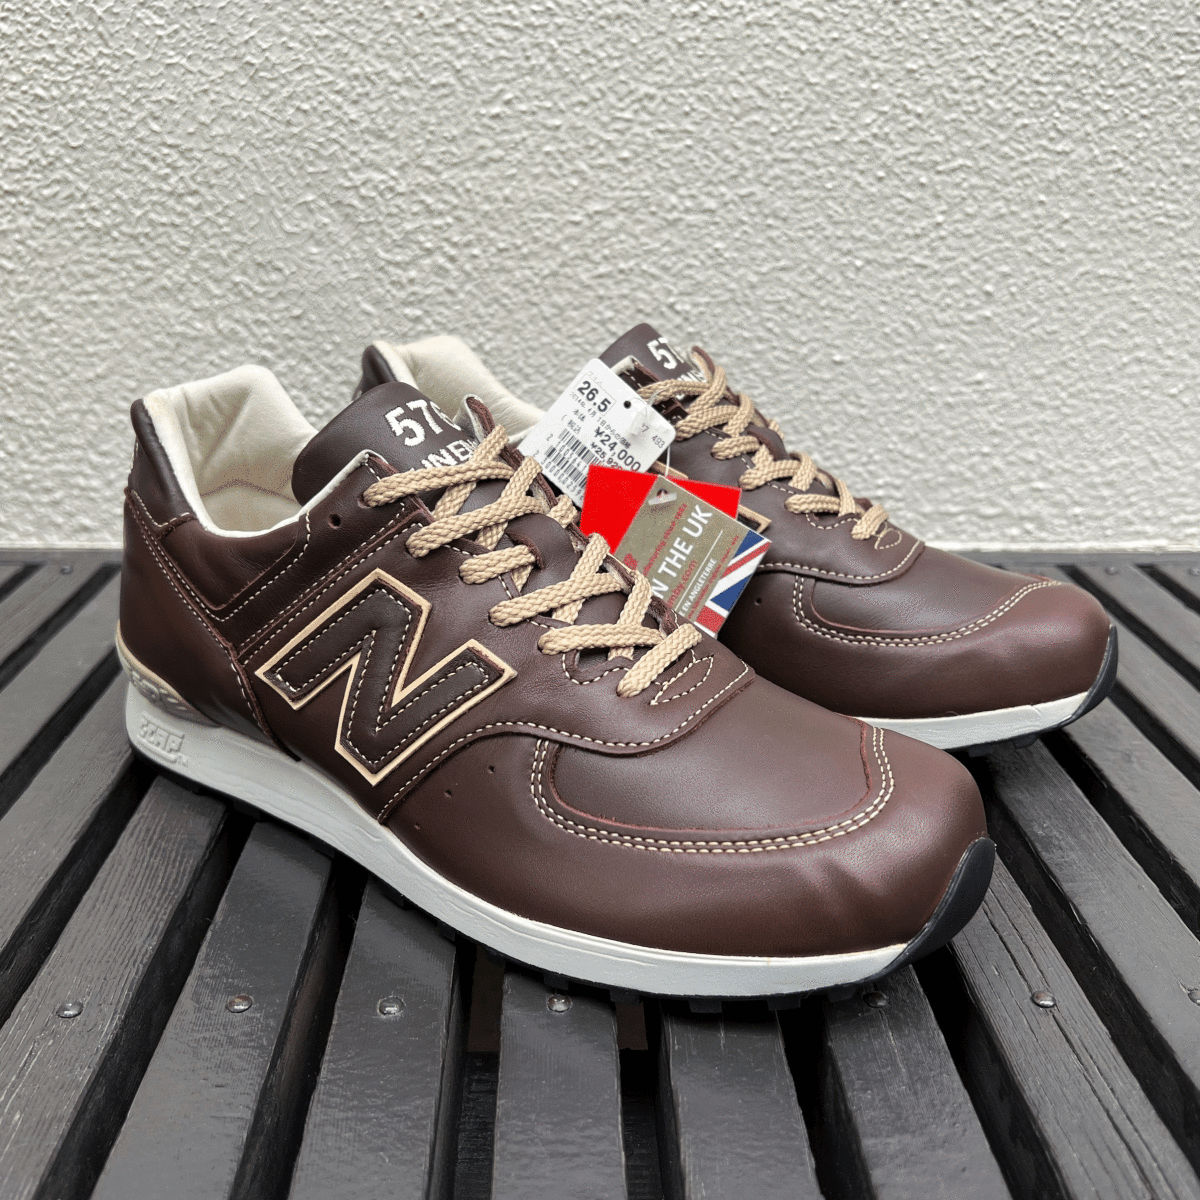 UK製【LIMITED EDITION】NEW BALANCE LM576UK NB BROWN/TAN US8.5D 